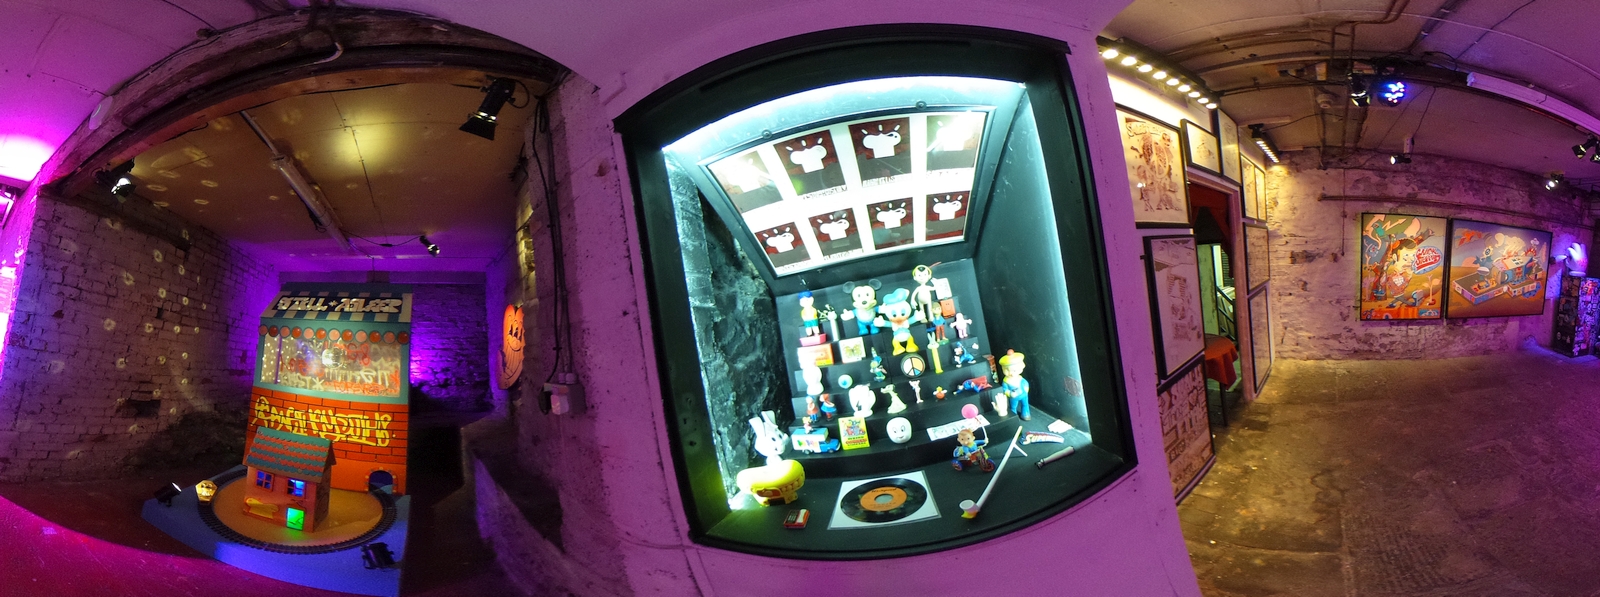 360° tour of "The Artist Proof" by Sickboy